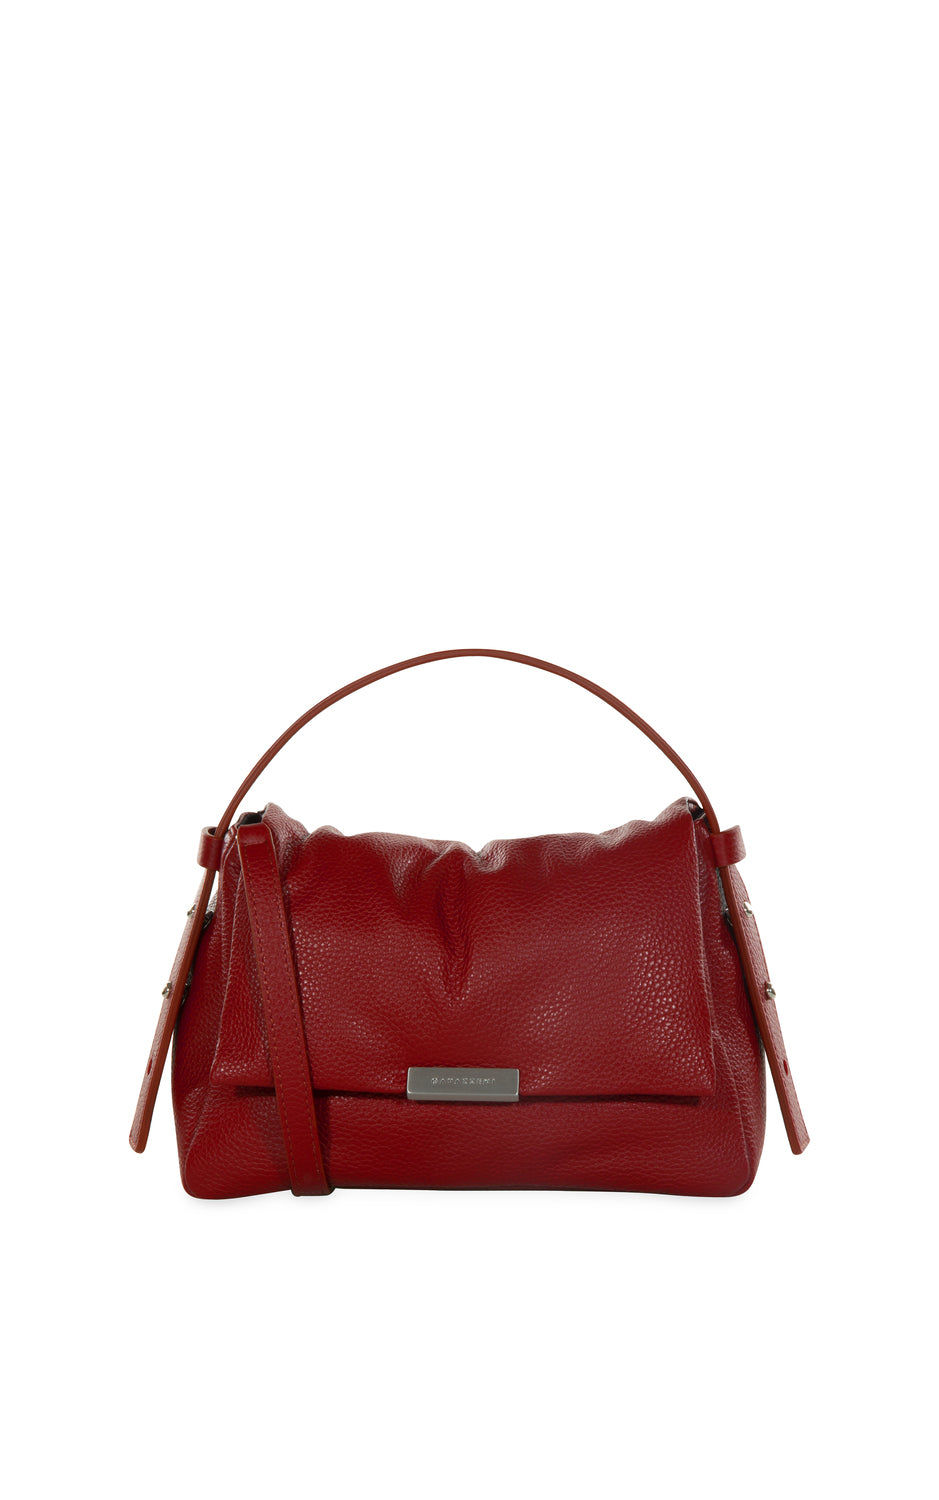 Marge S in Fuchsia Grained Leather